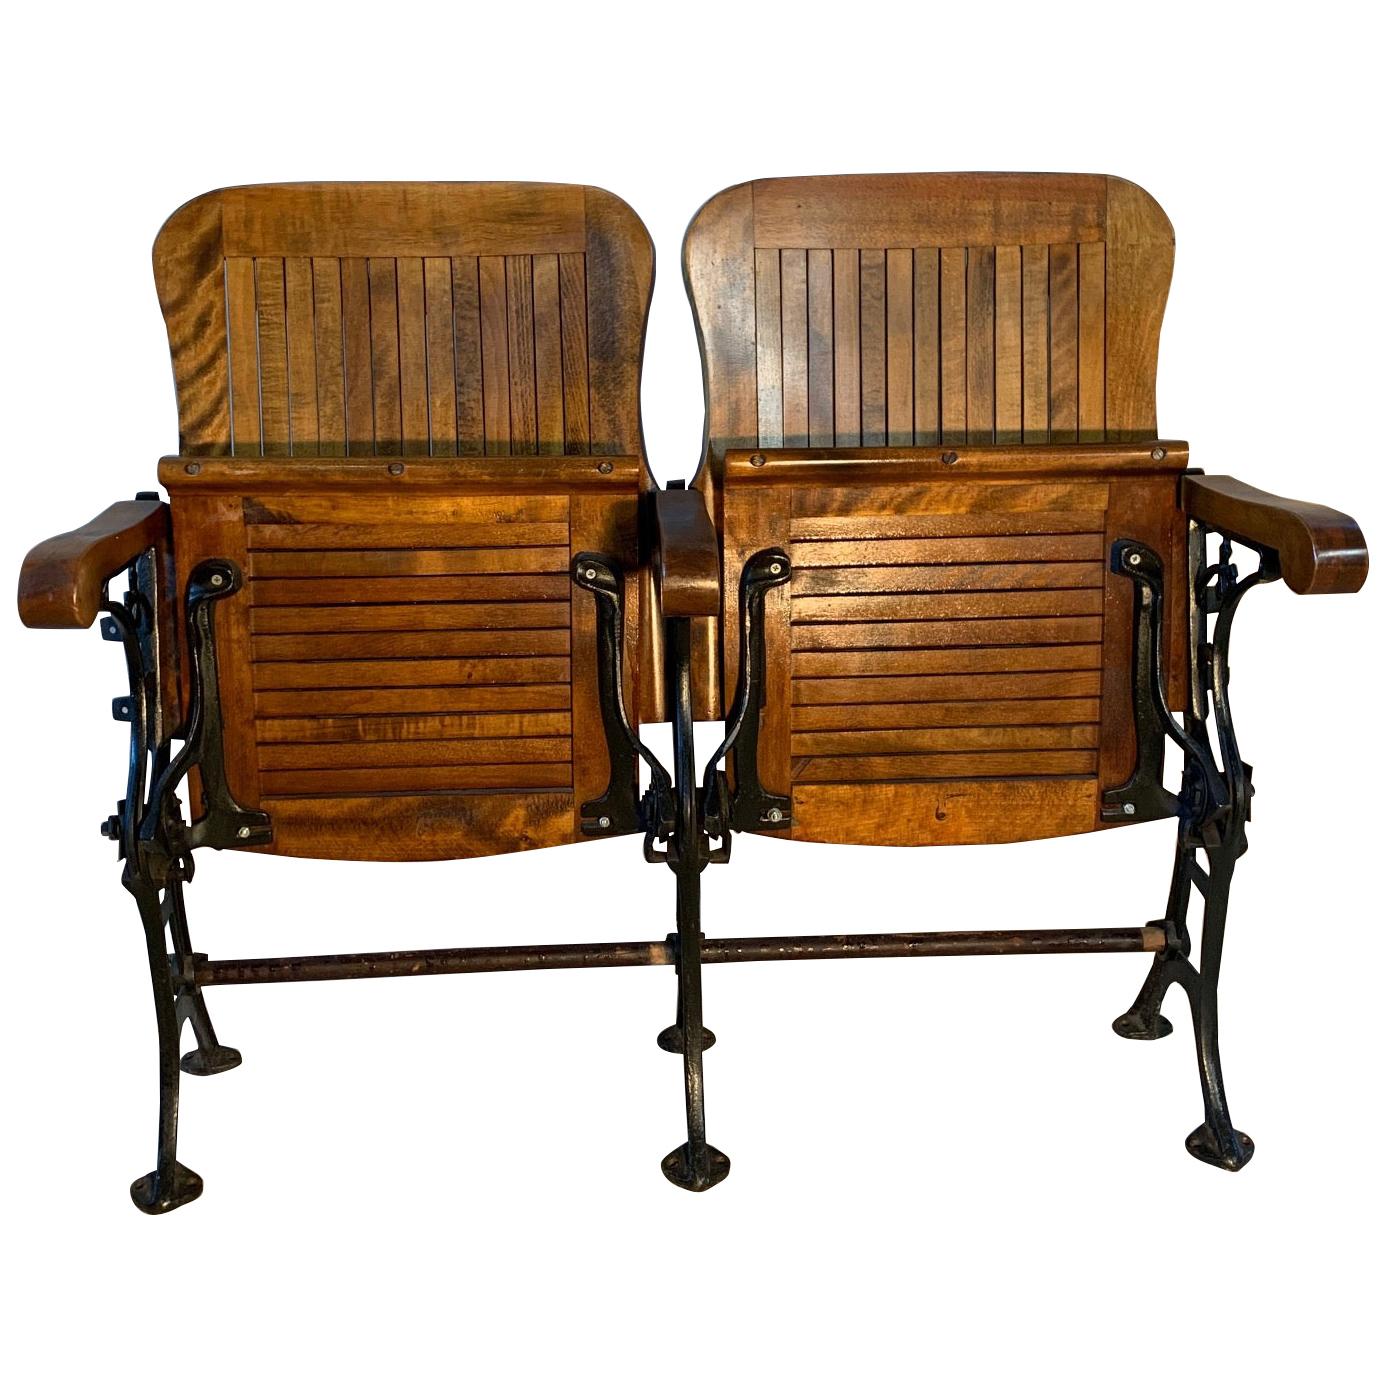 Early 20th Century Double Seat Folding Theater Chairs, circa 1910-1920